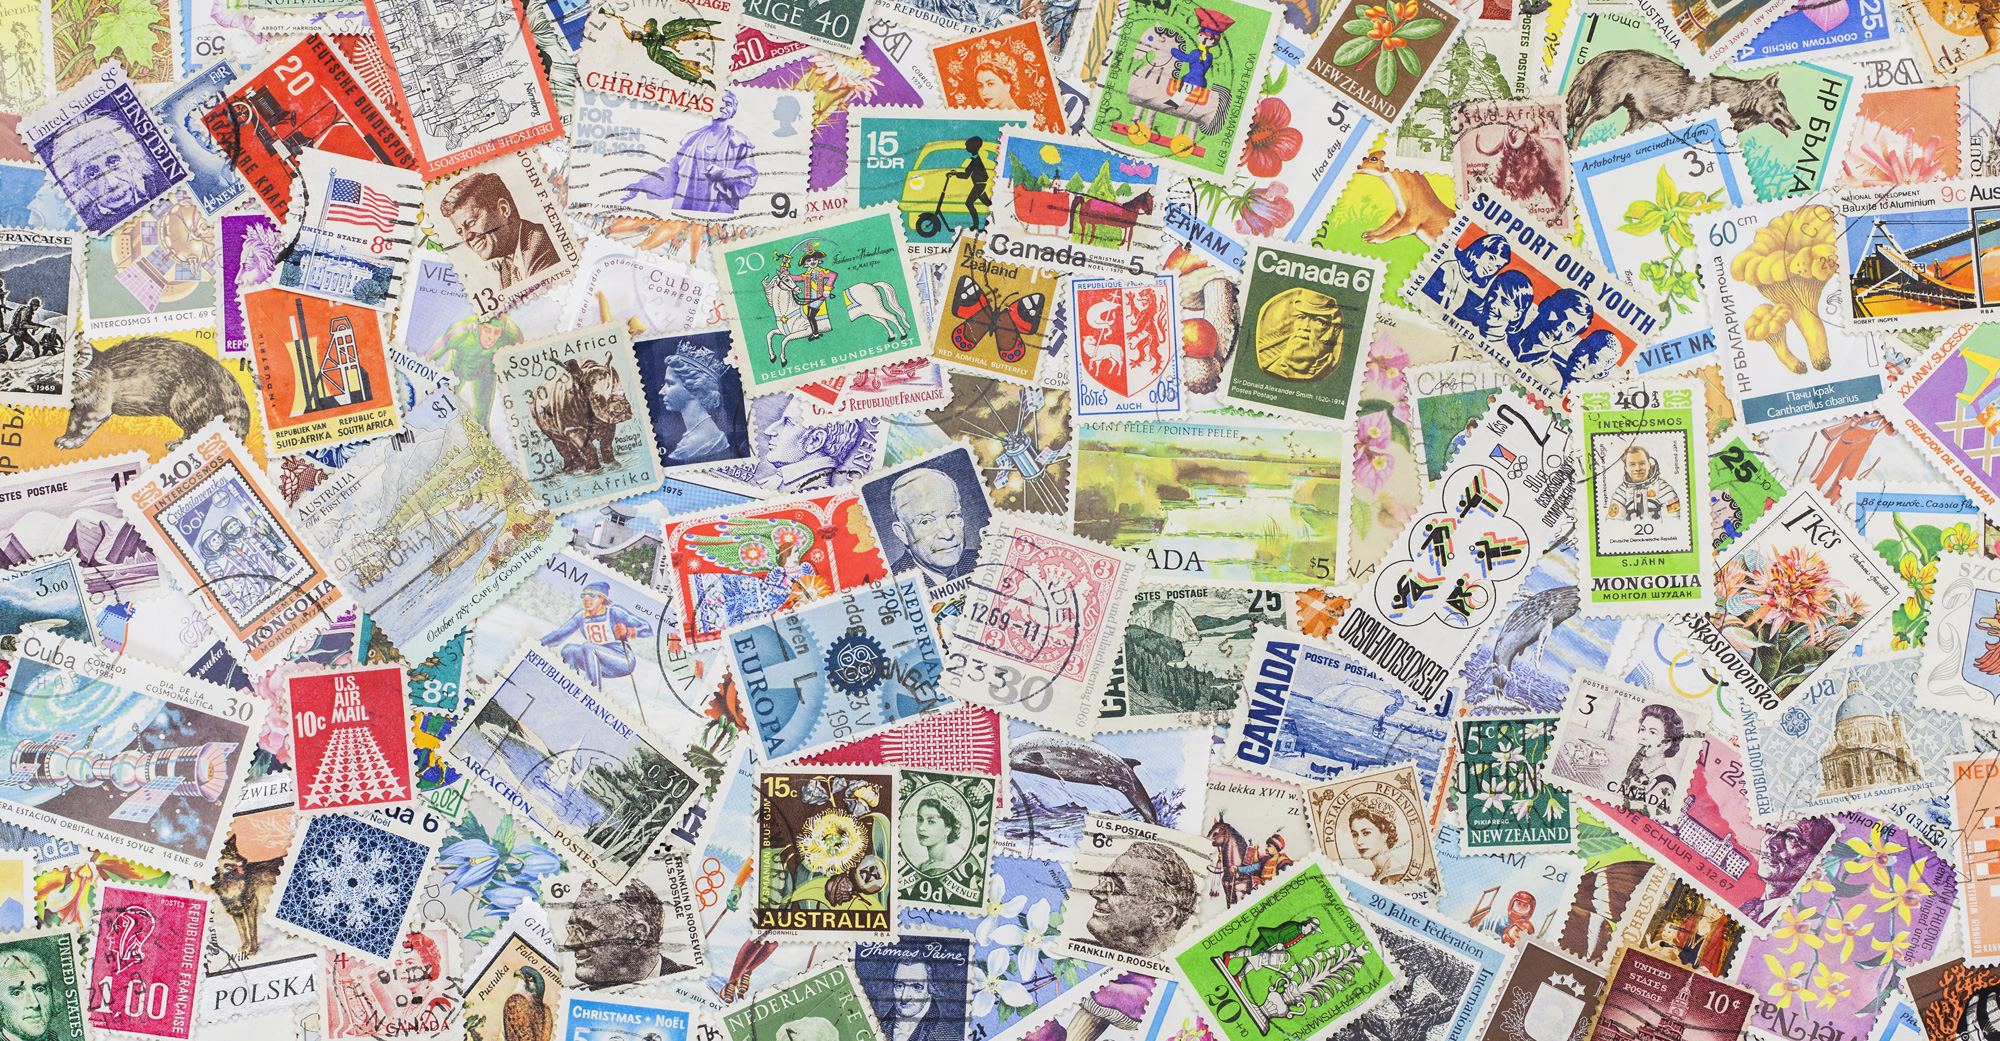 internet-along-with-the-handwritten-letter-the-postage-stamp-is